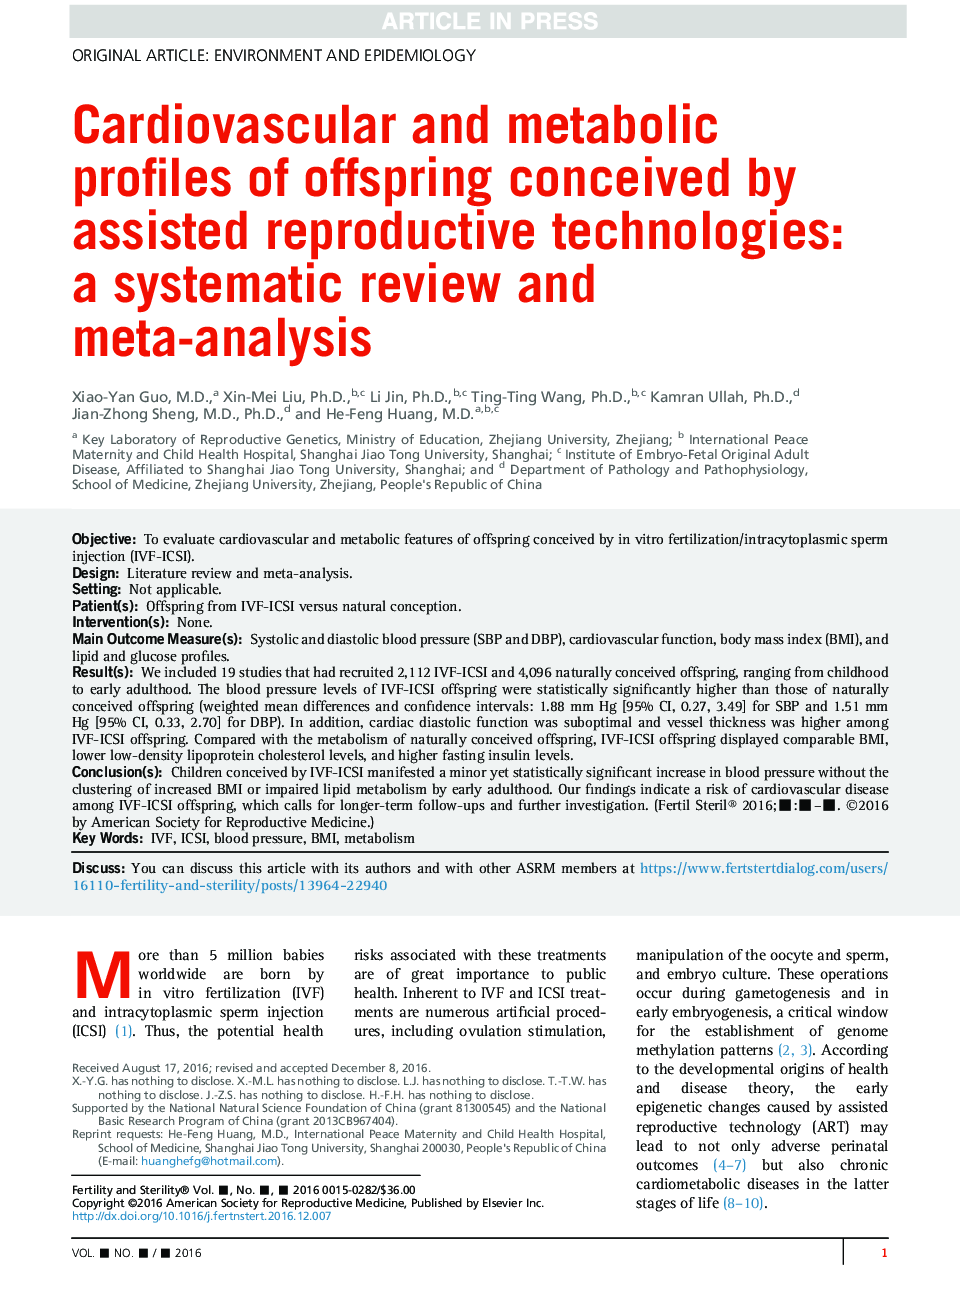 Cardiovascular and metabolic profiles of offspring conceived by assisted reproductive technologies: a systematic review and meta-analysis